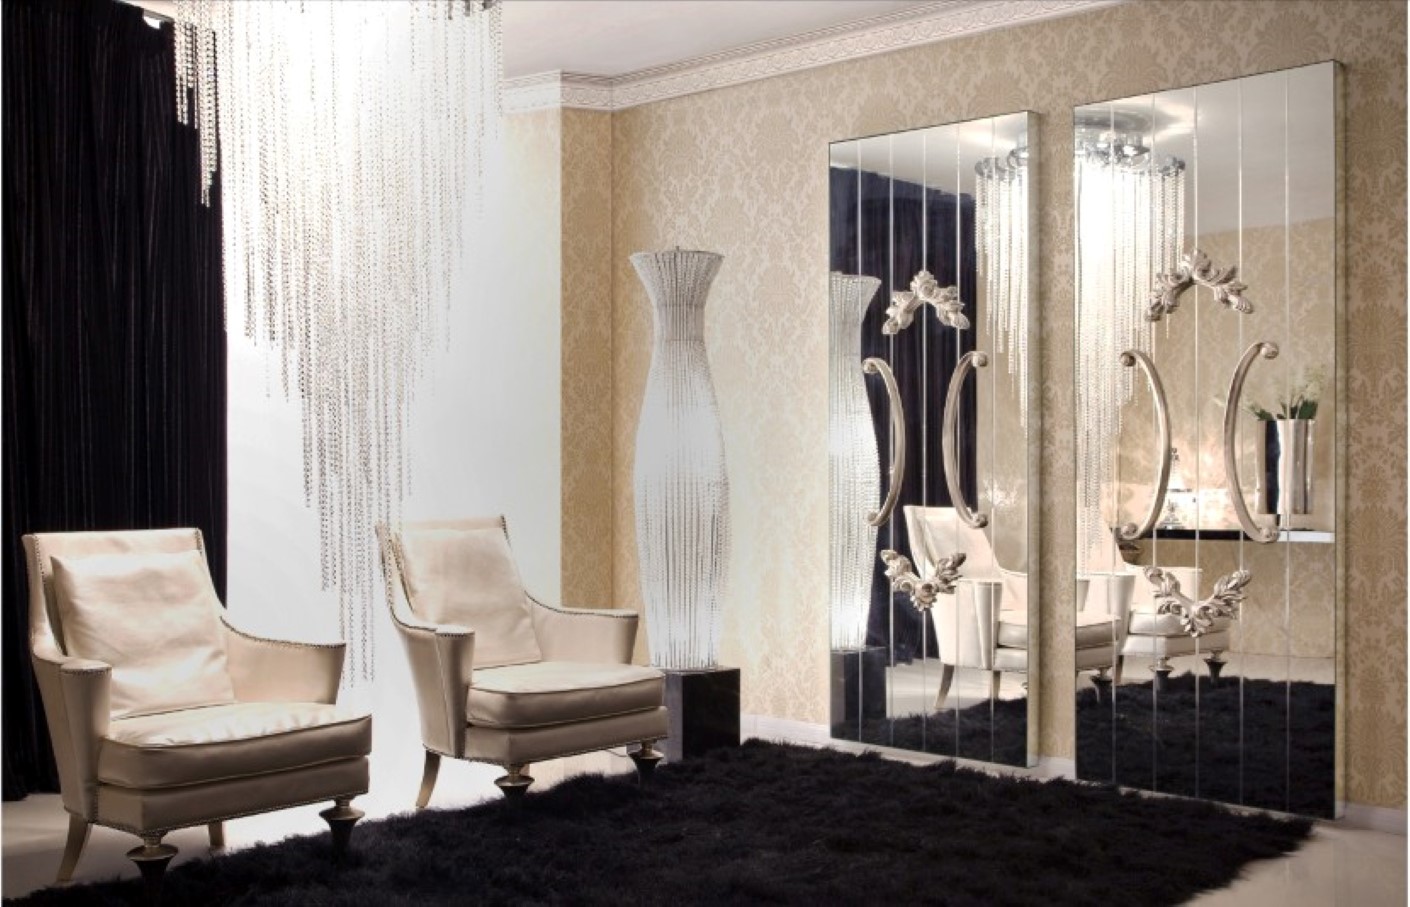 Interior Design Fur Regal Interior Design With Black Fur Area Rug And Awesome Large Mirror Idea Also White Wingback Chairs Plus Huge Crystal Chandelier House Designs  Maximize Your Reflection On A Large Wall Mirror 